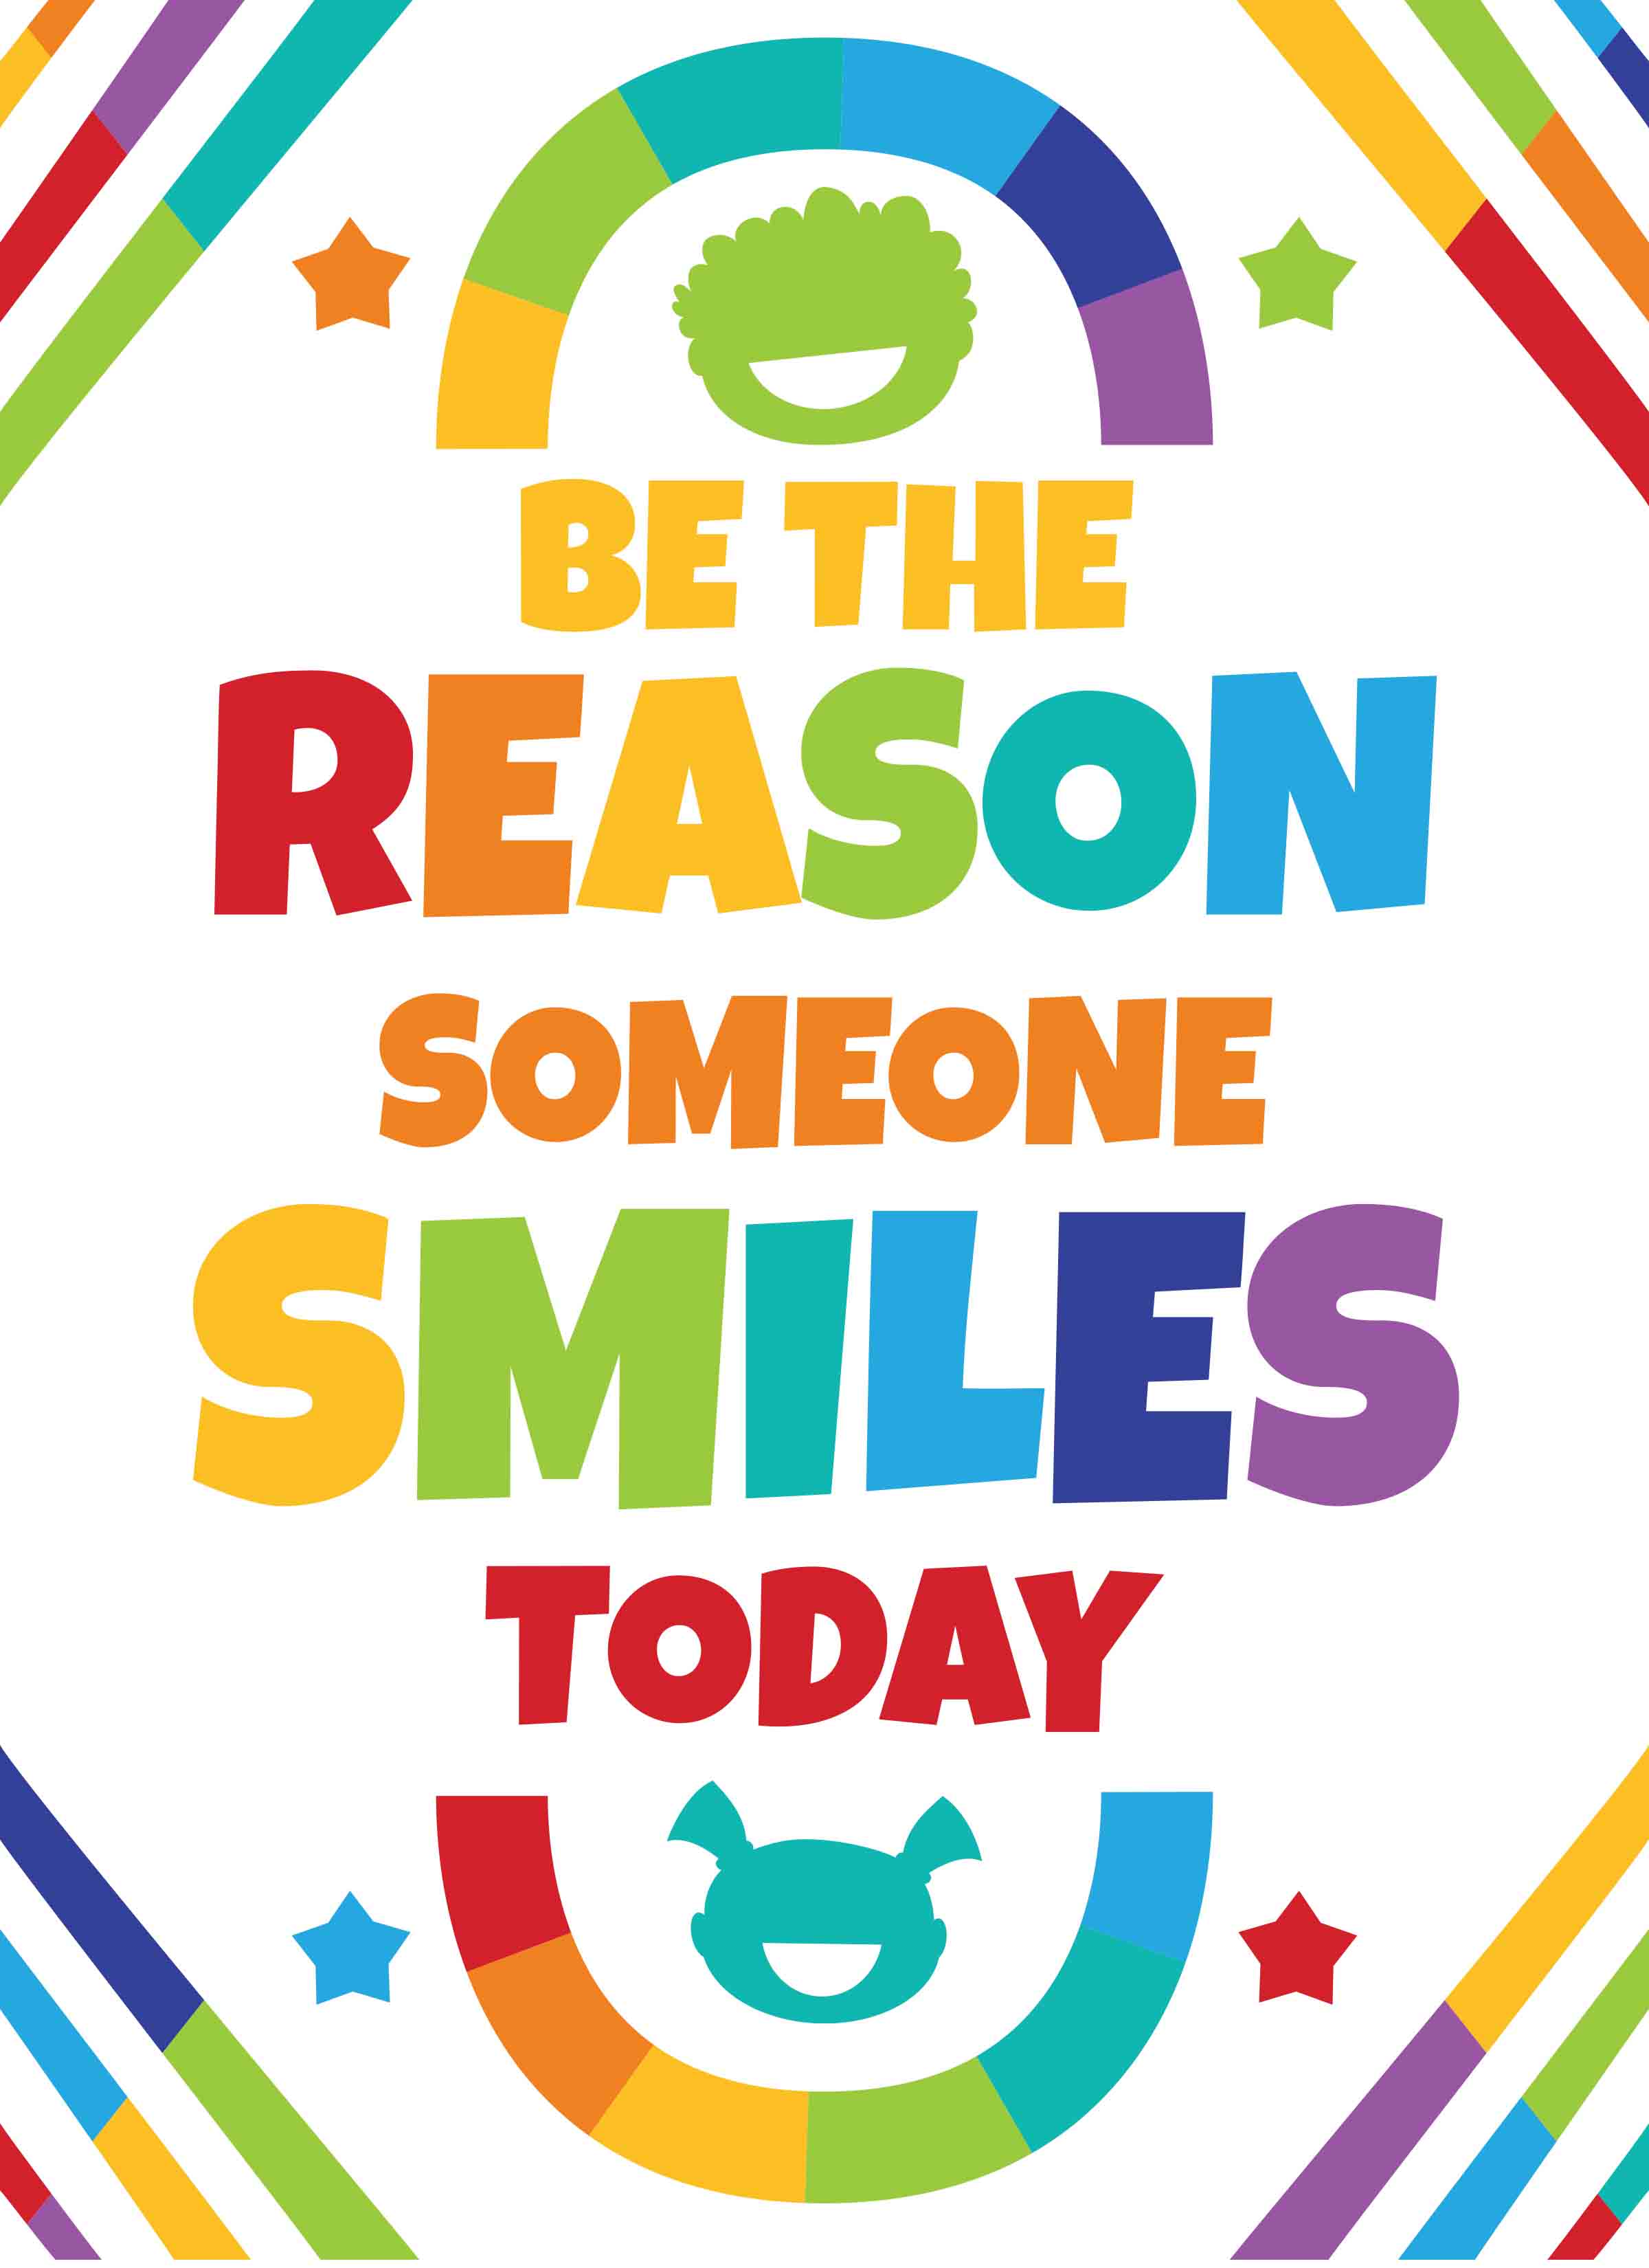 Print Your Someone Sproutbrite Smiles Own | Posters Be Reason - the